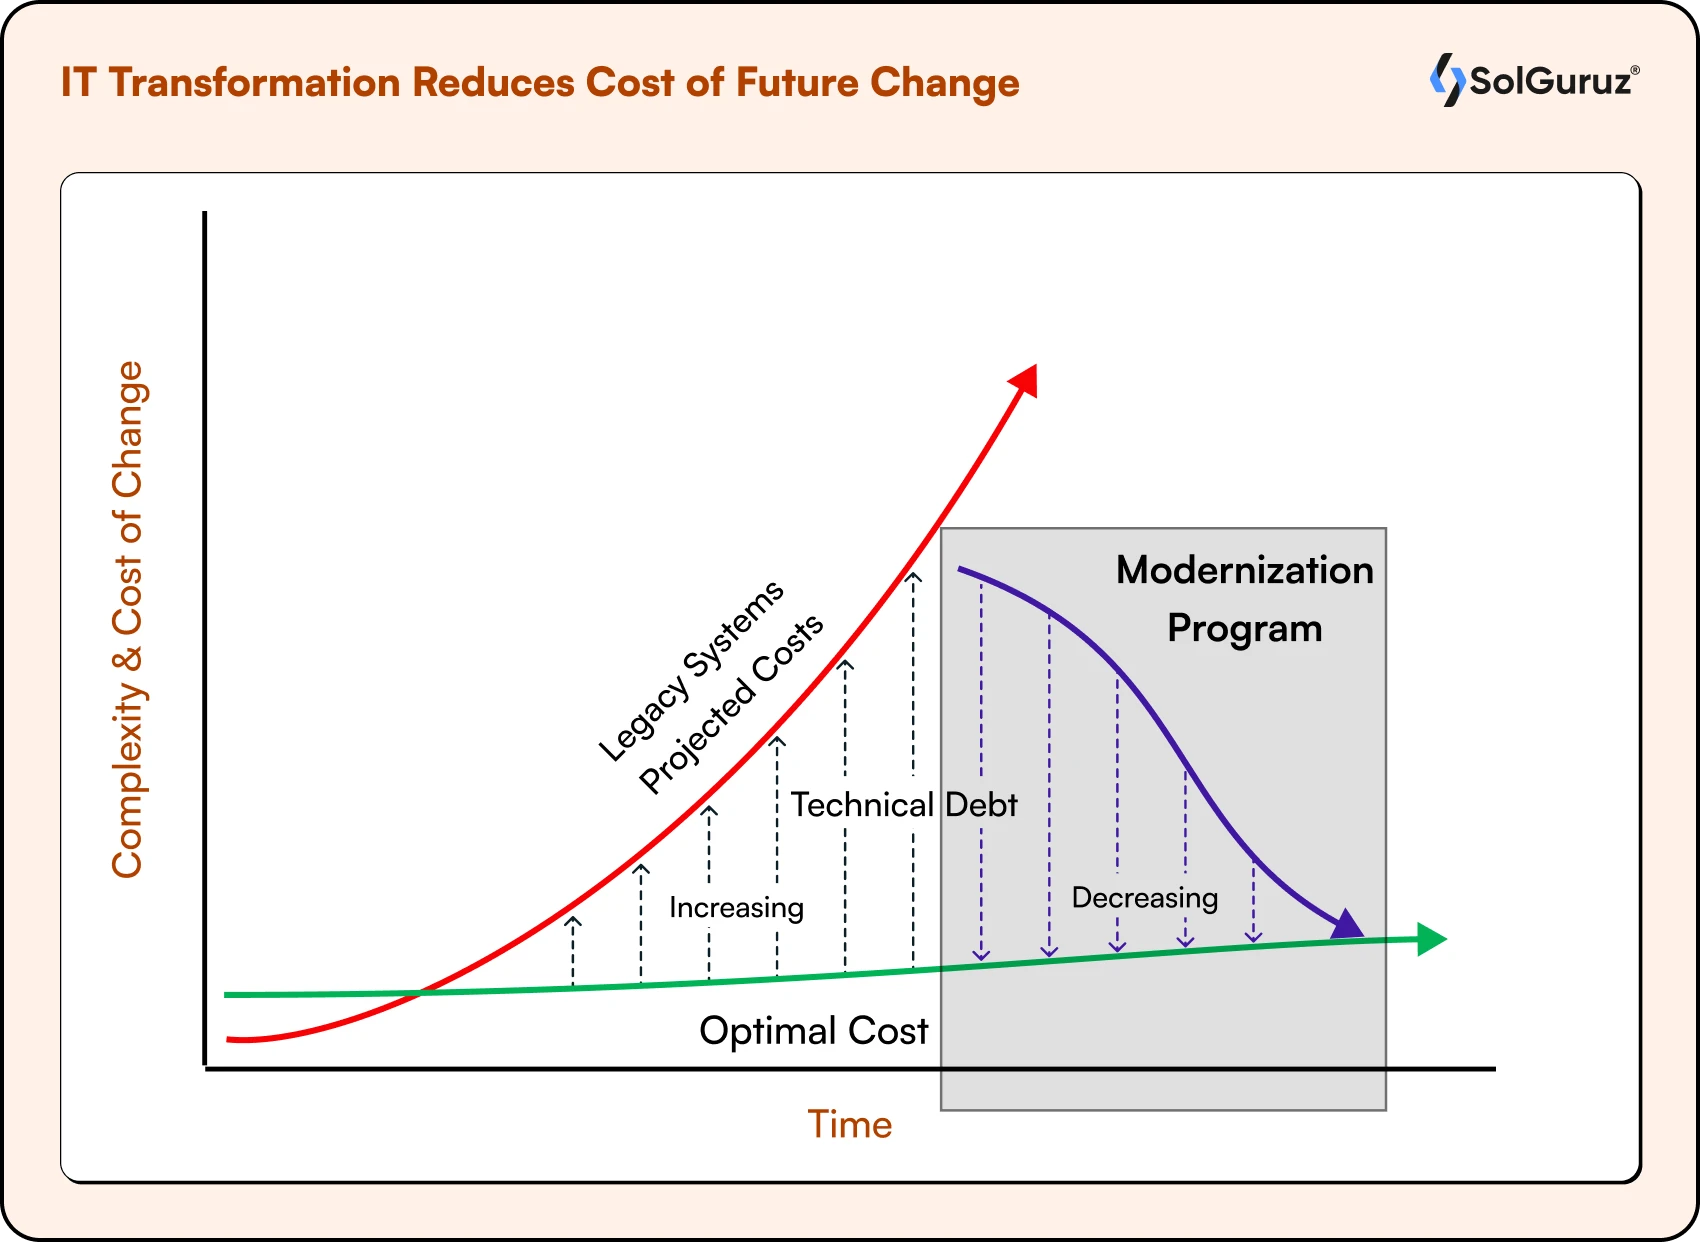 IT Transformation Reduces Cost of Future Change